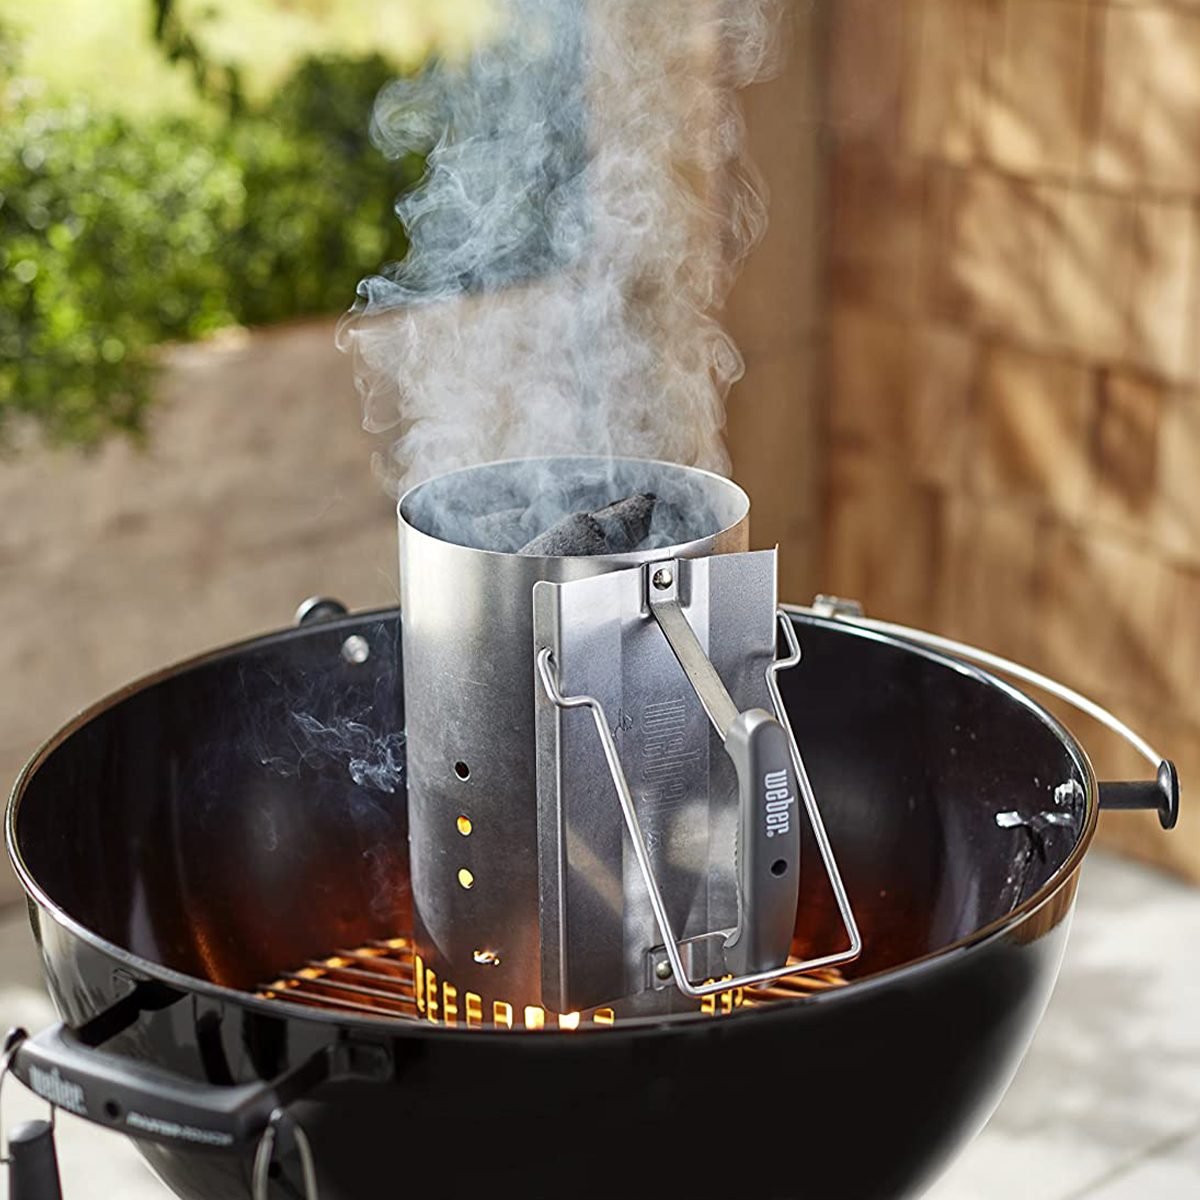 19 of the Best Grilling Accessories Amazon Customers Love